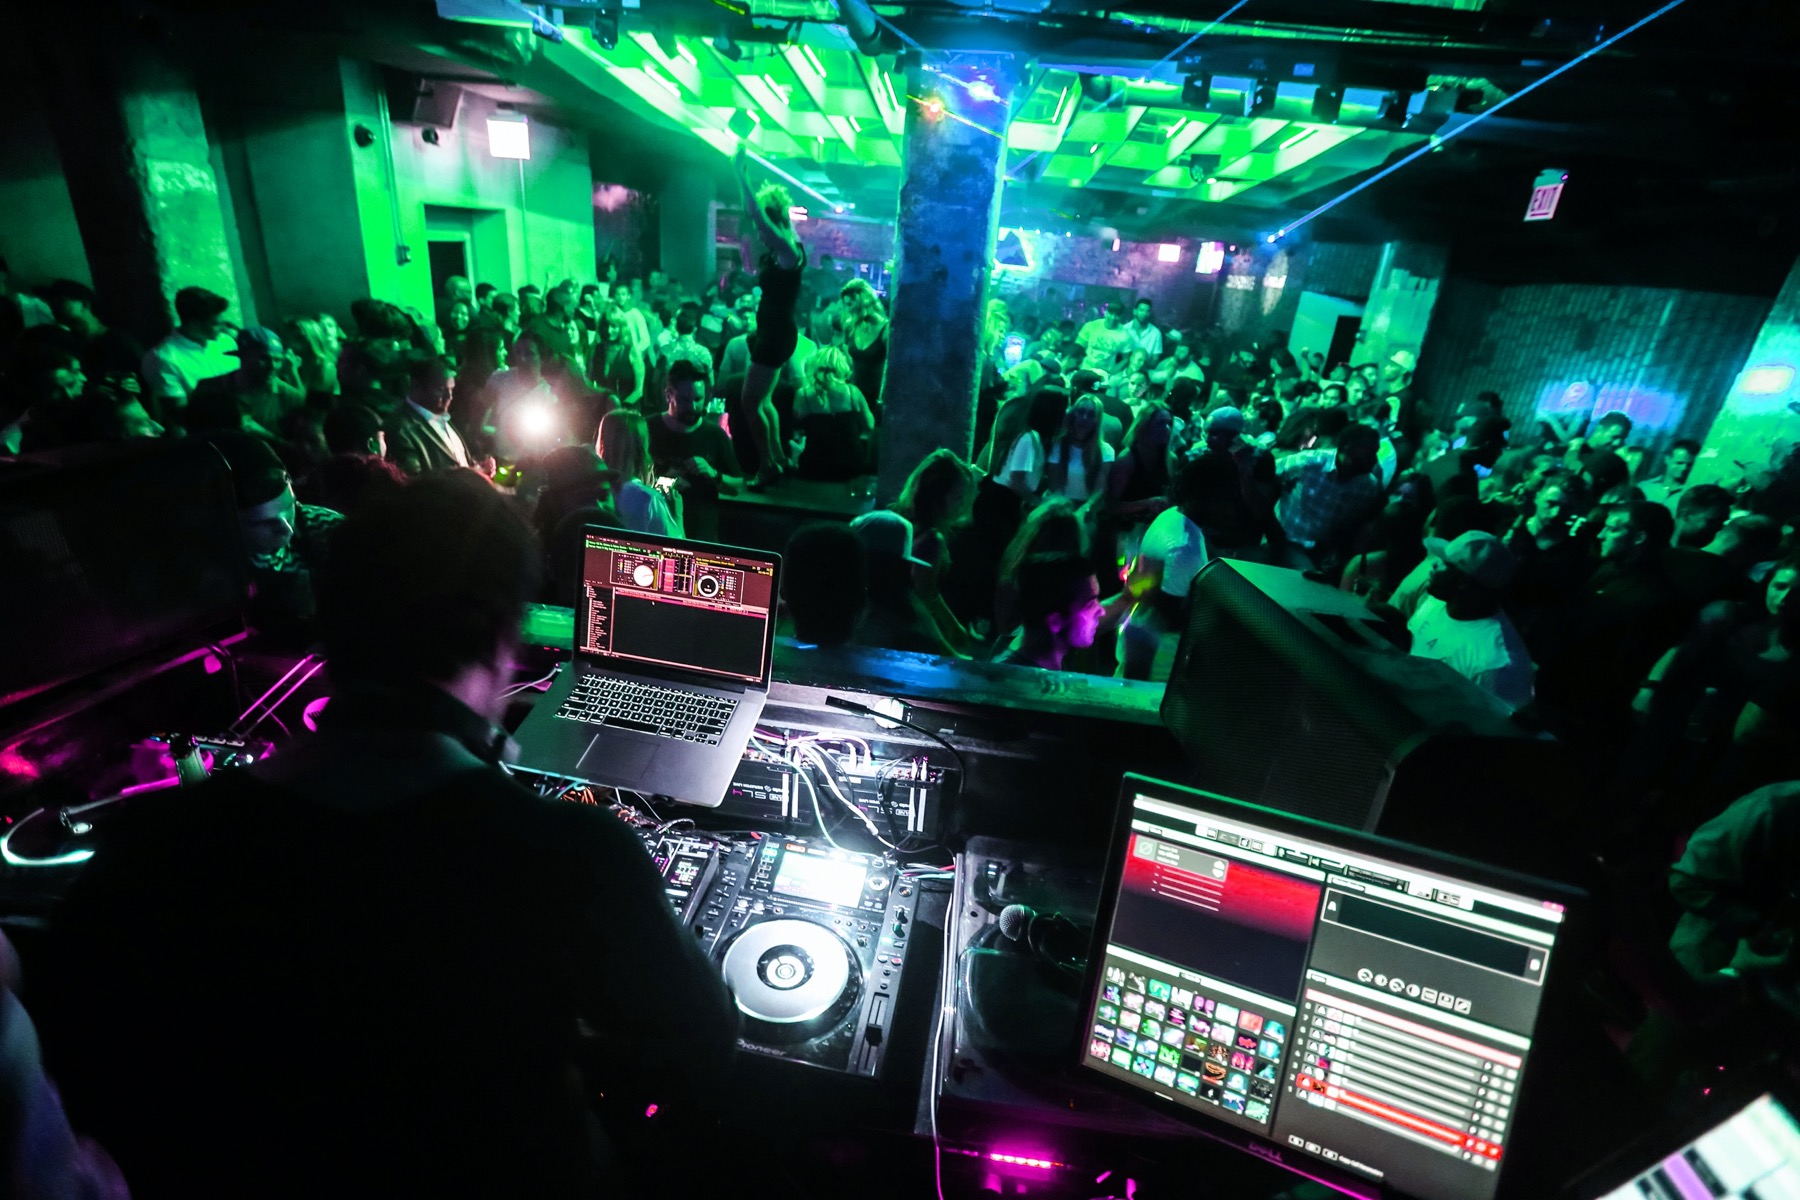 Chicago Nightclubs & Lounges  Find Nightlife, Dance Clubs & Bars